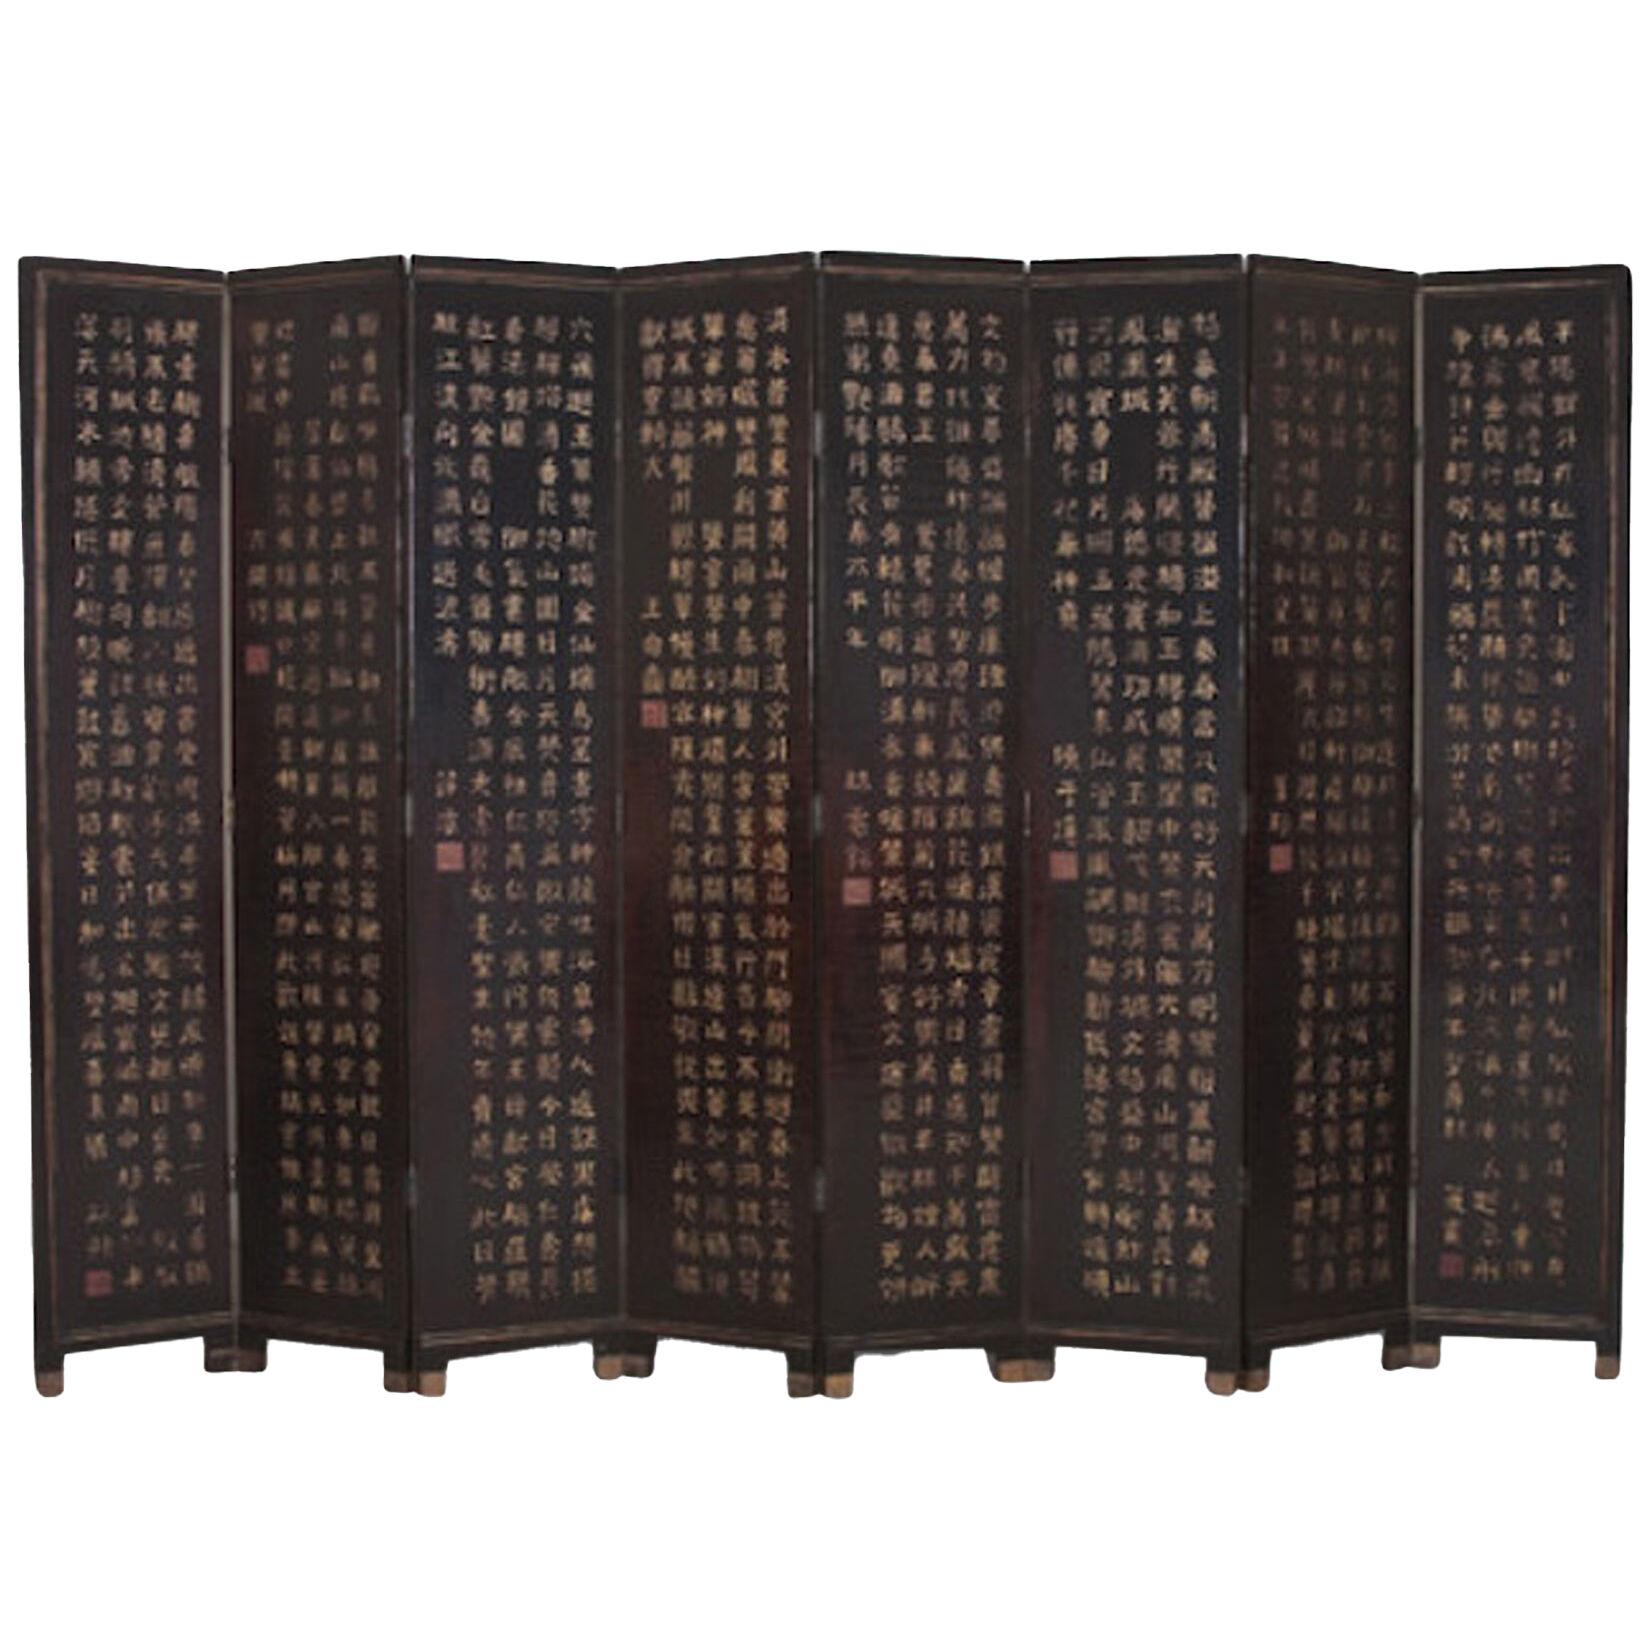 A Large Chinese Lacquer Screen